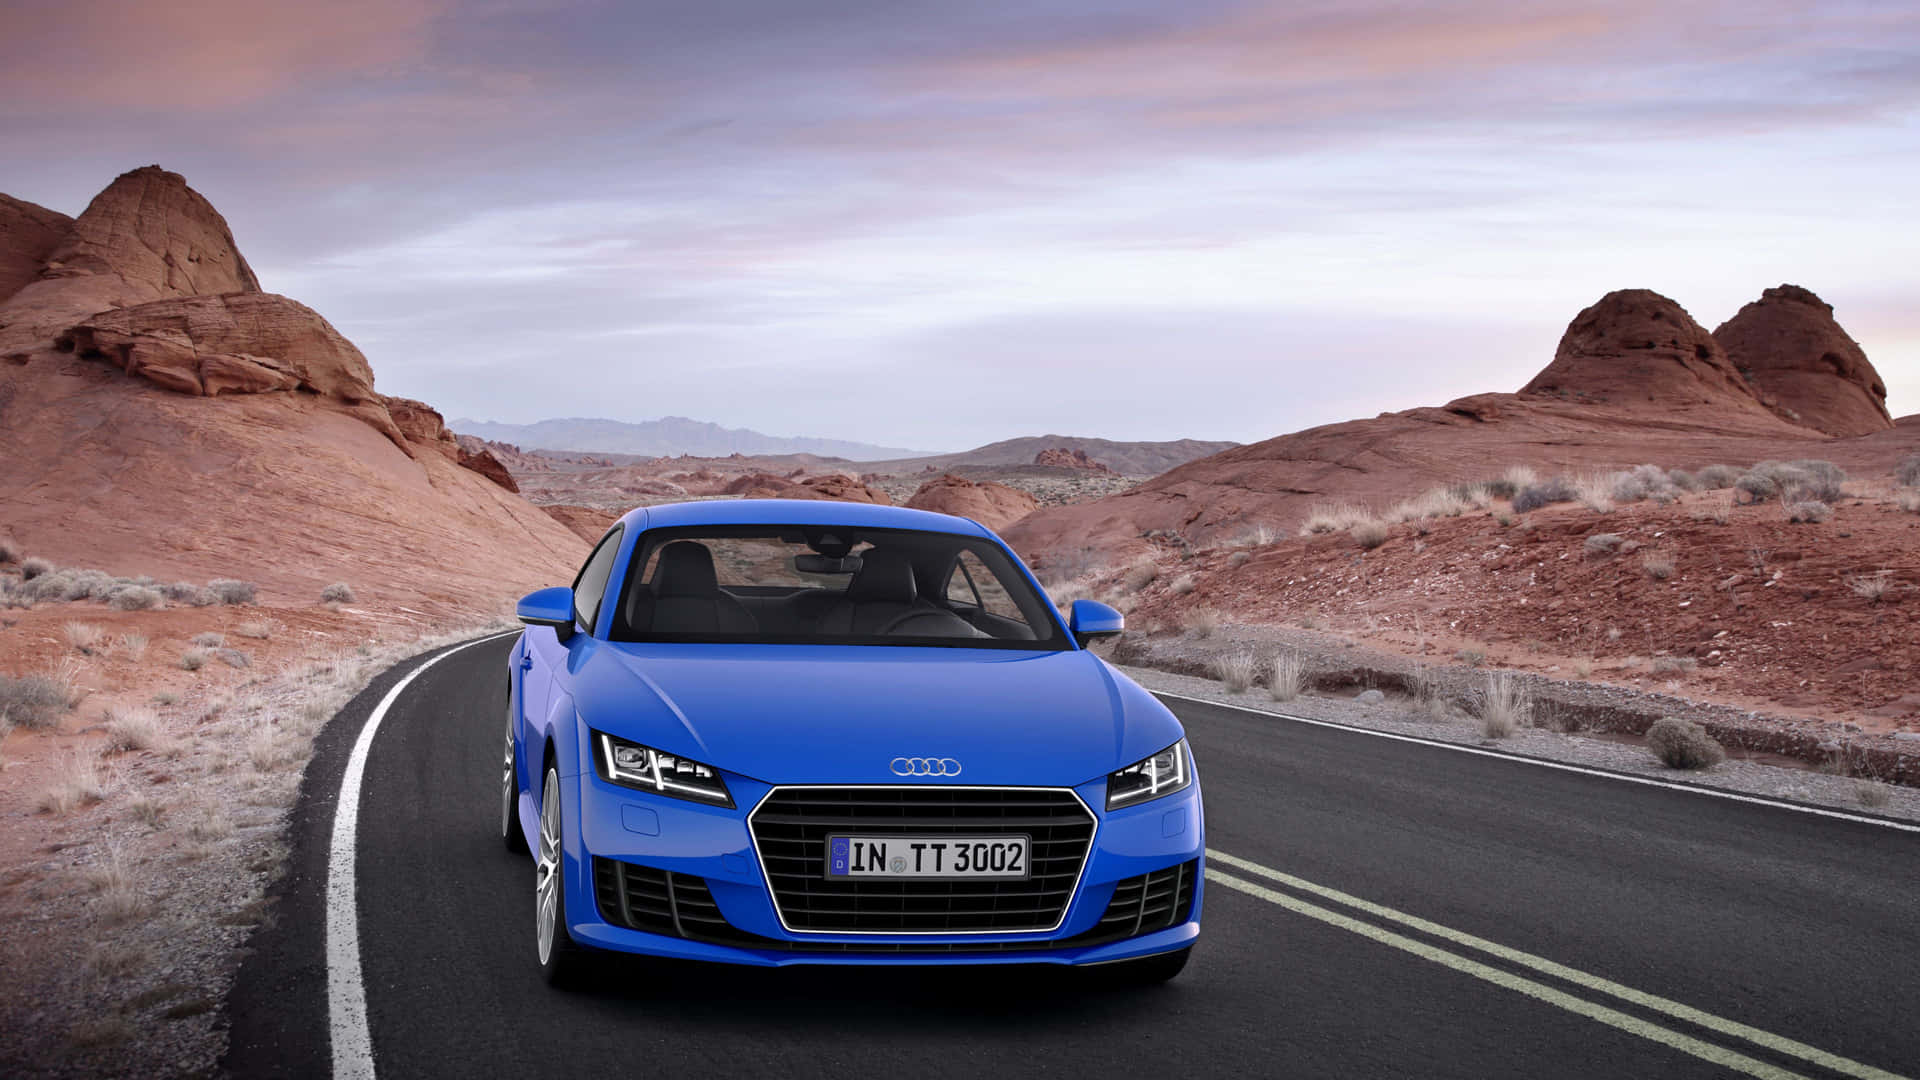 Stunning Audi TT Sports Coupe in Action Wallpaper